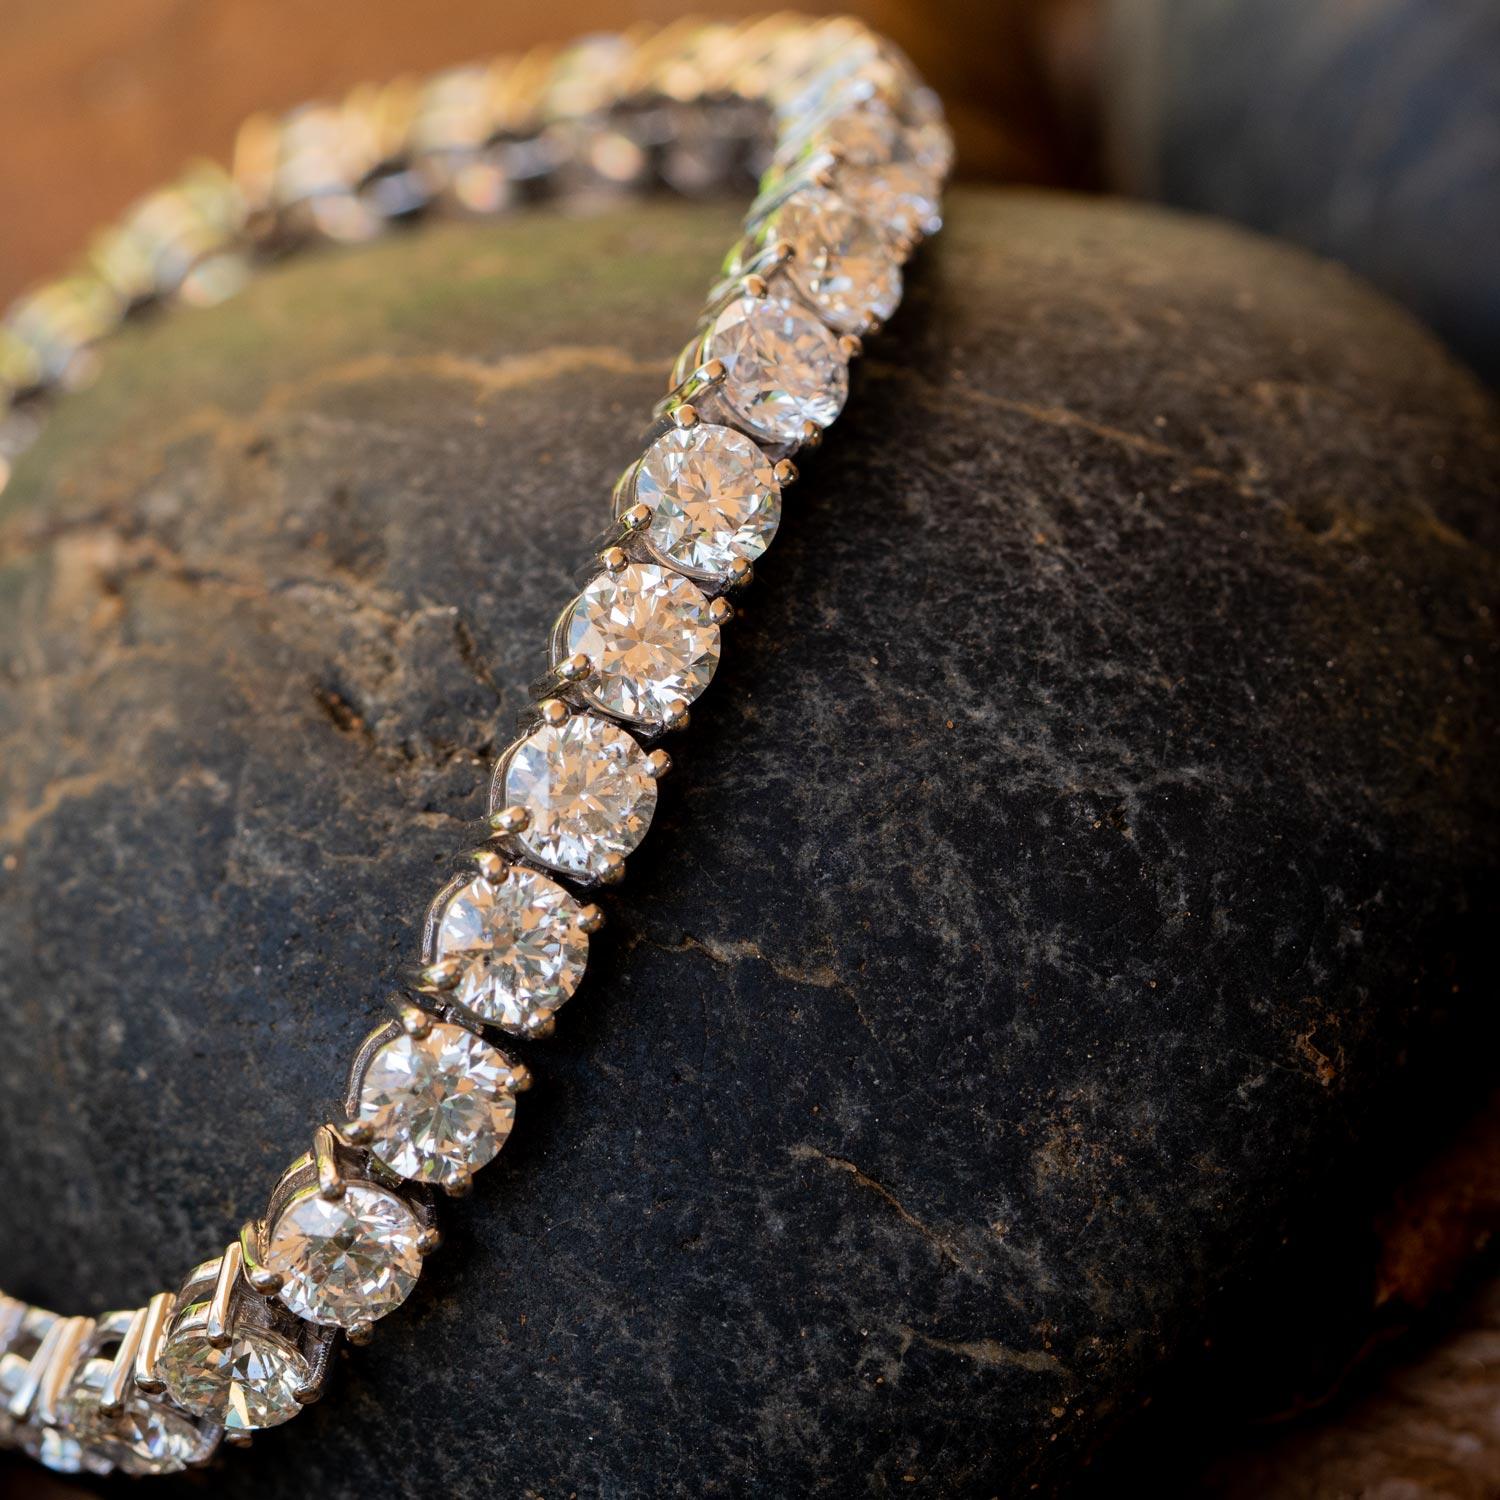 This elegant natural diamond bracelet truly shines.  Each individually-set diamond in the series lightly flexes at its connection points, ensuring a comfortable, secure wearing experience for formal events or everyday luxury.

This diamond bracelet